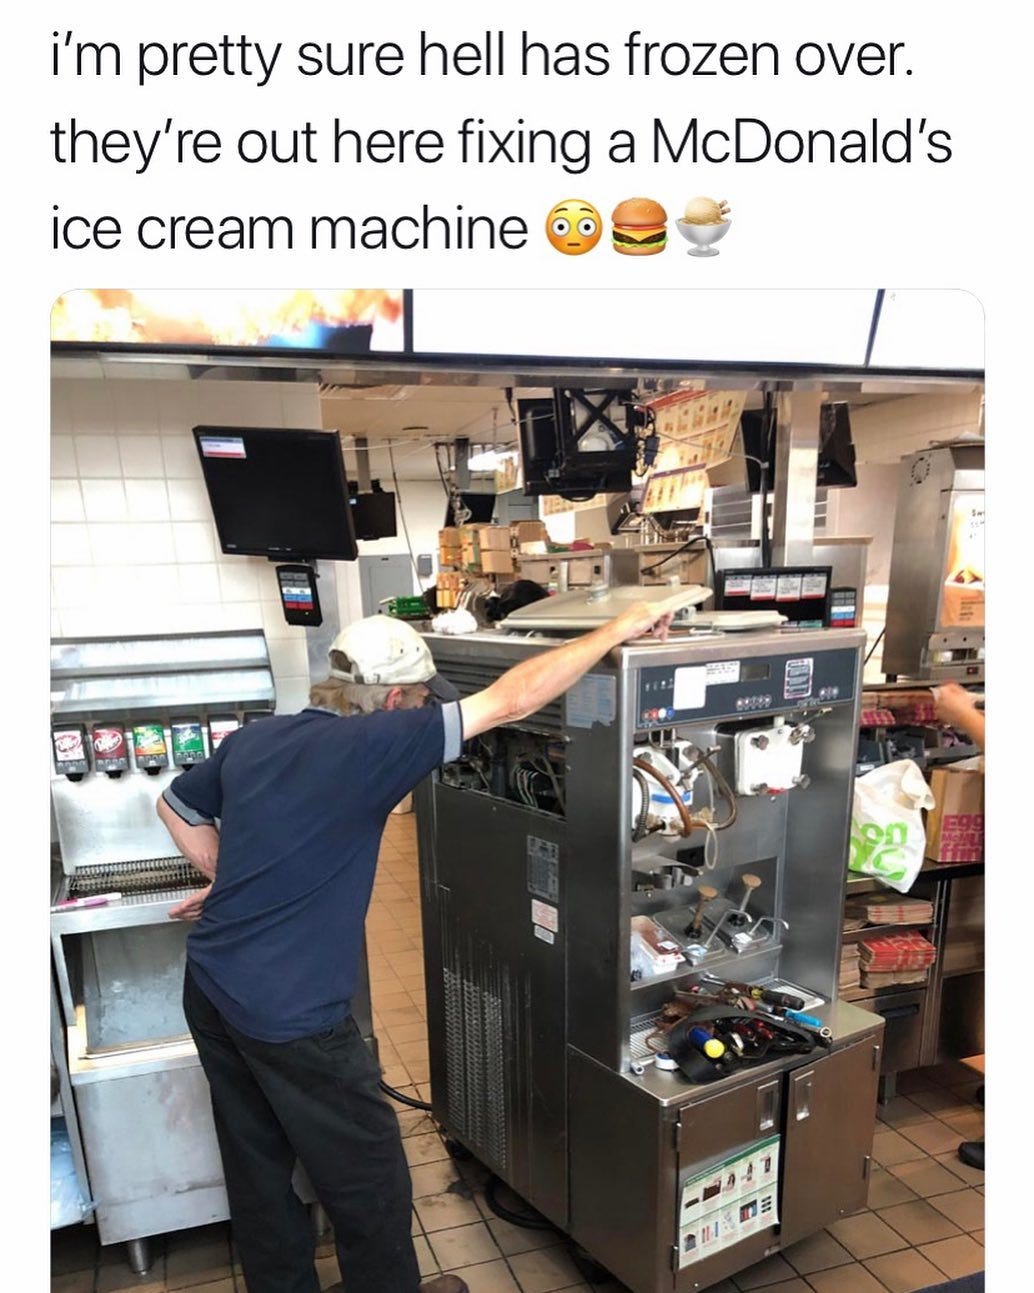 They are out here fixing a McDonalds ice cream machine meme - AhSeeit